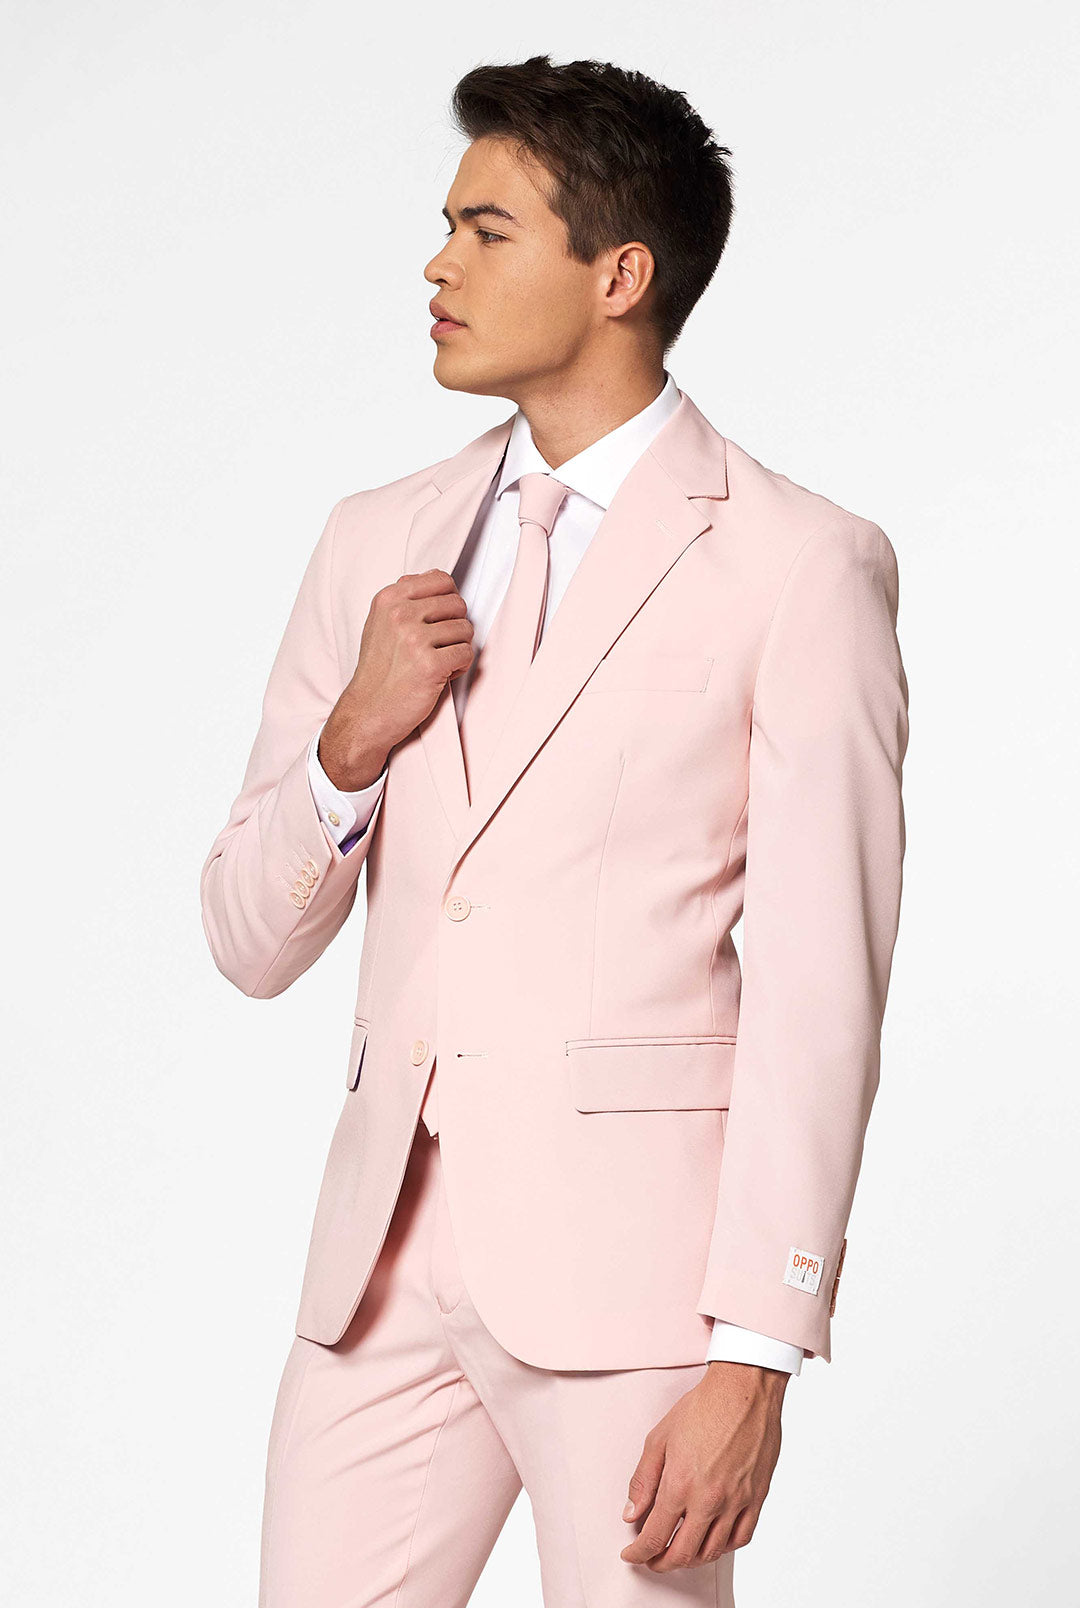 OppoSuits Mr Pink Suit OSUI-0015 Mr. Pink